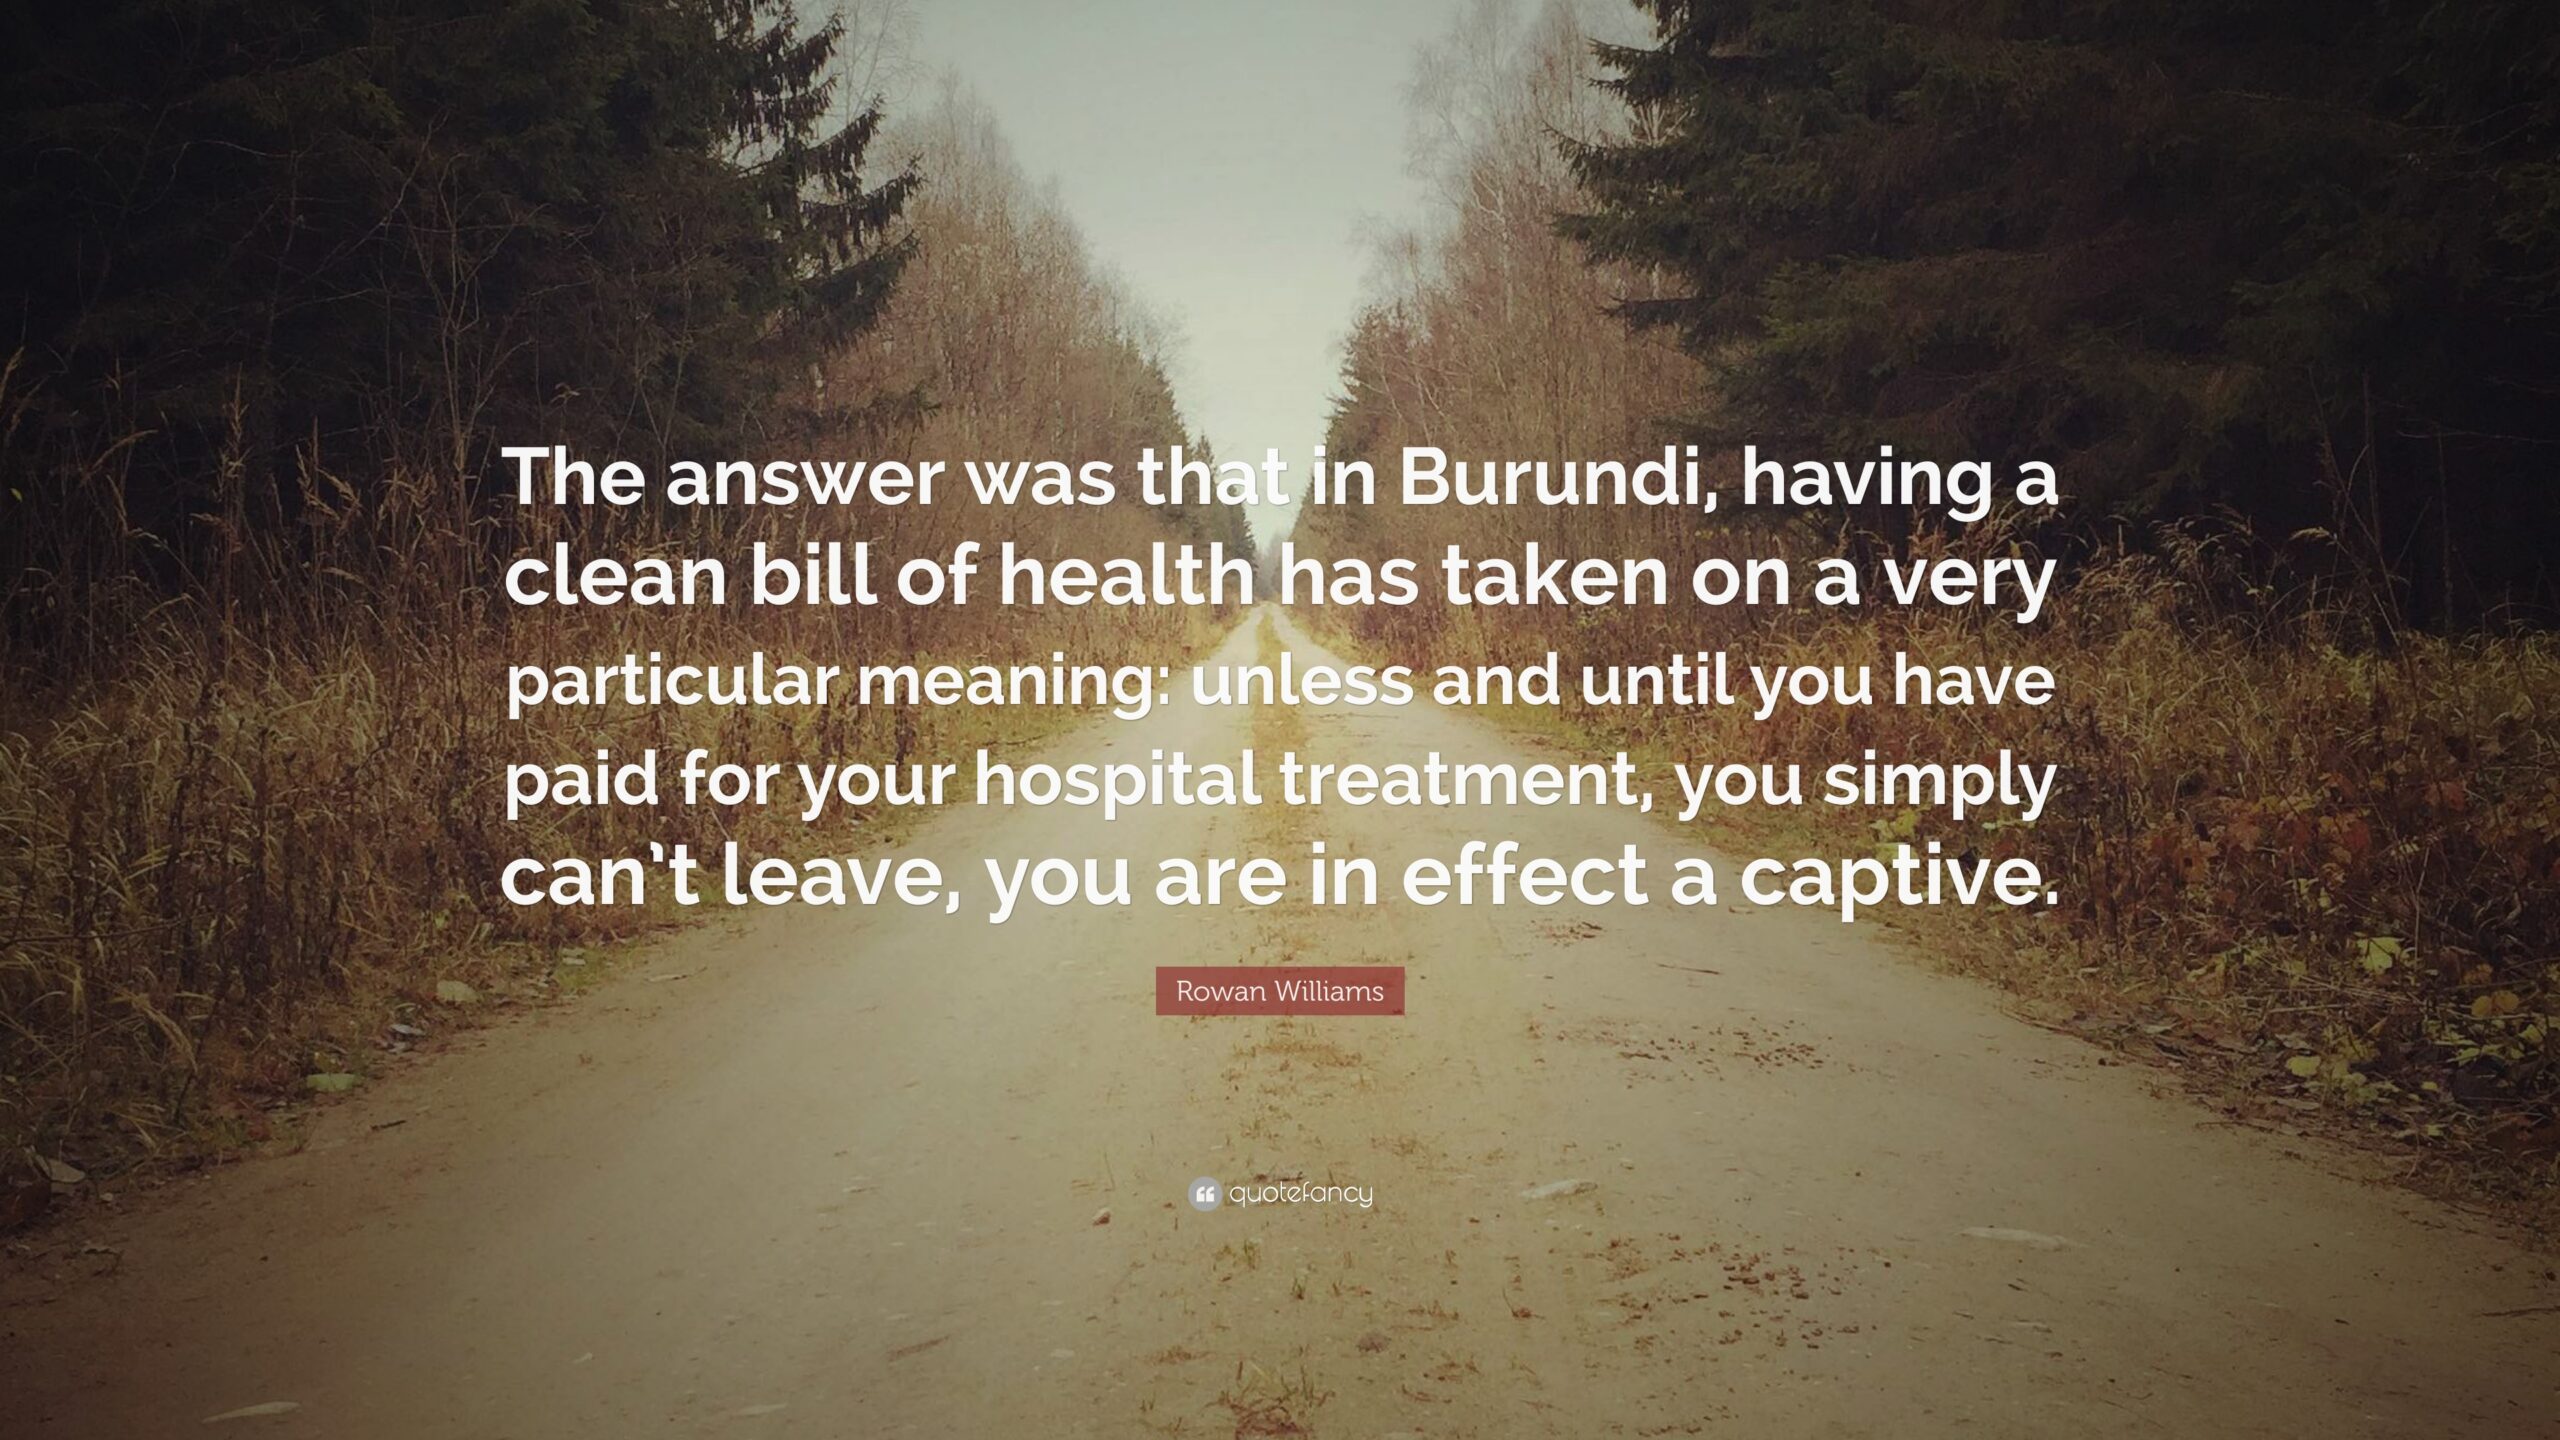 Rowan Williams Quote “The answer was that in Burundi, having a